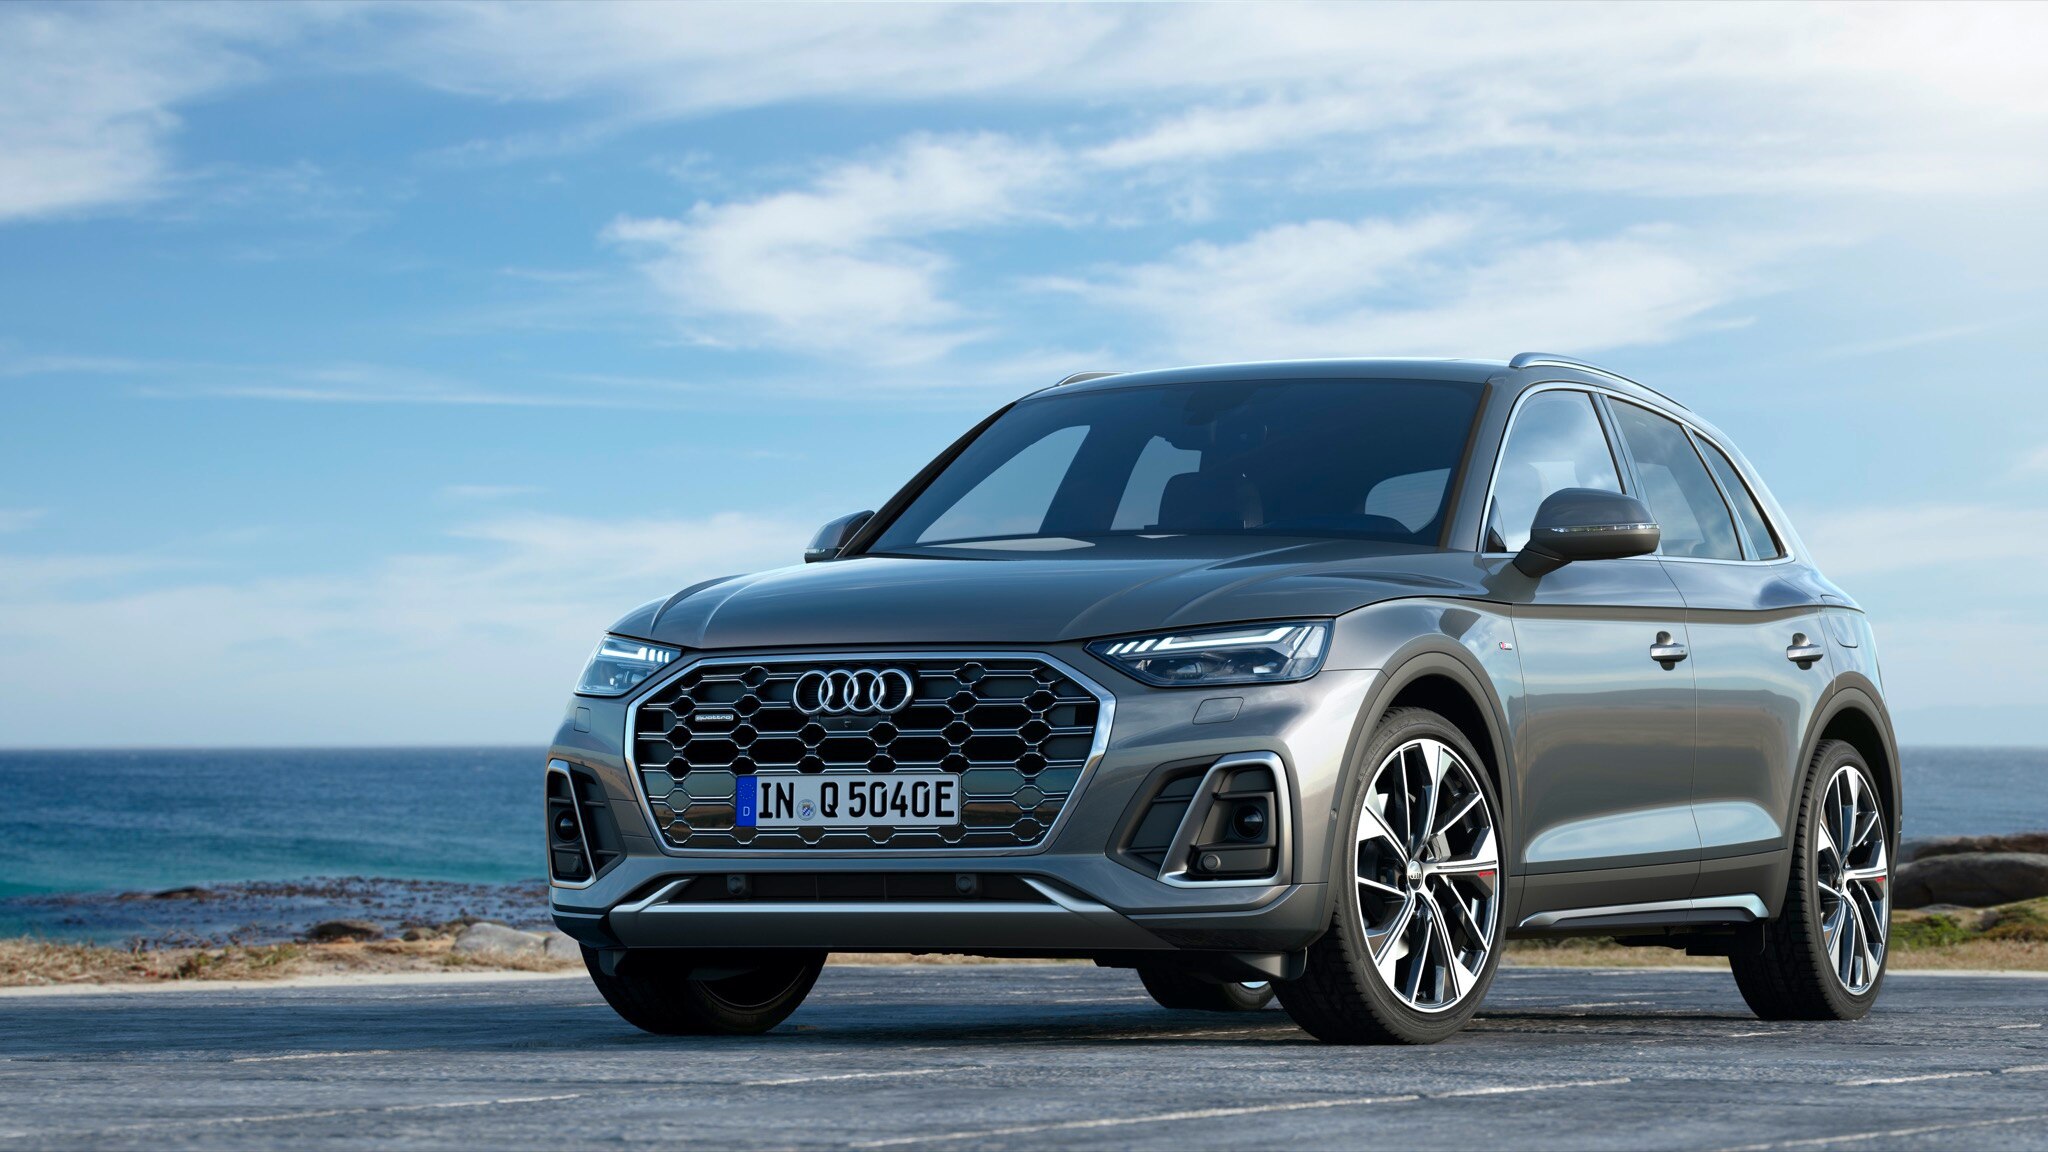 Audi Q5 and A7 Plug-In Hybrids Likely Getting Bigger ...